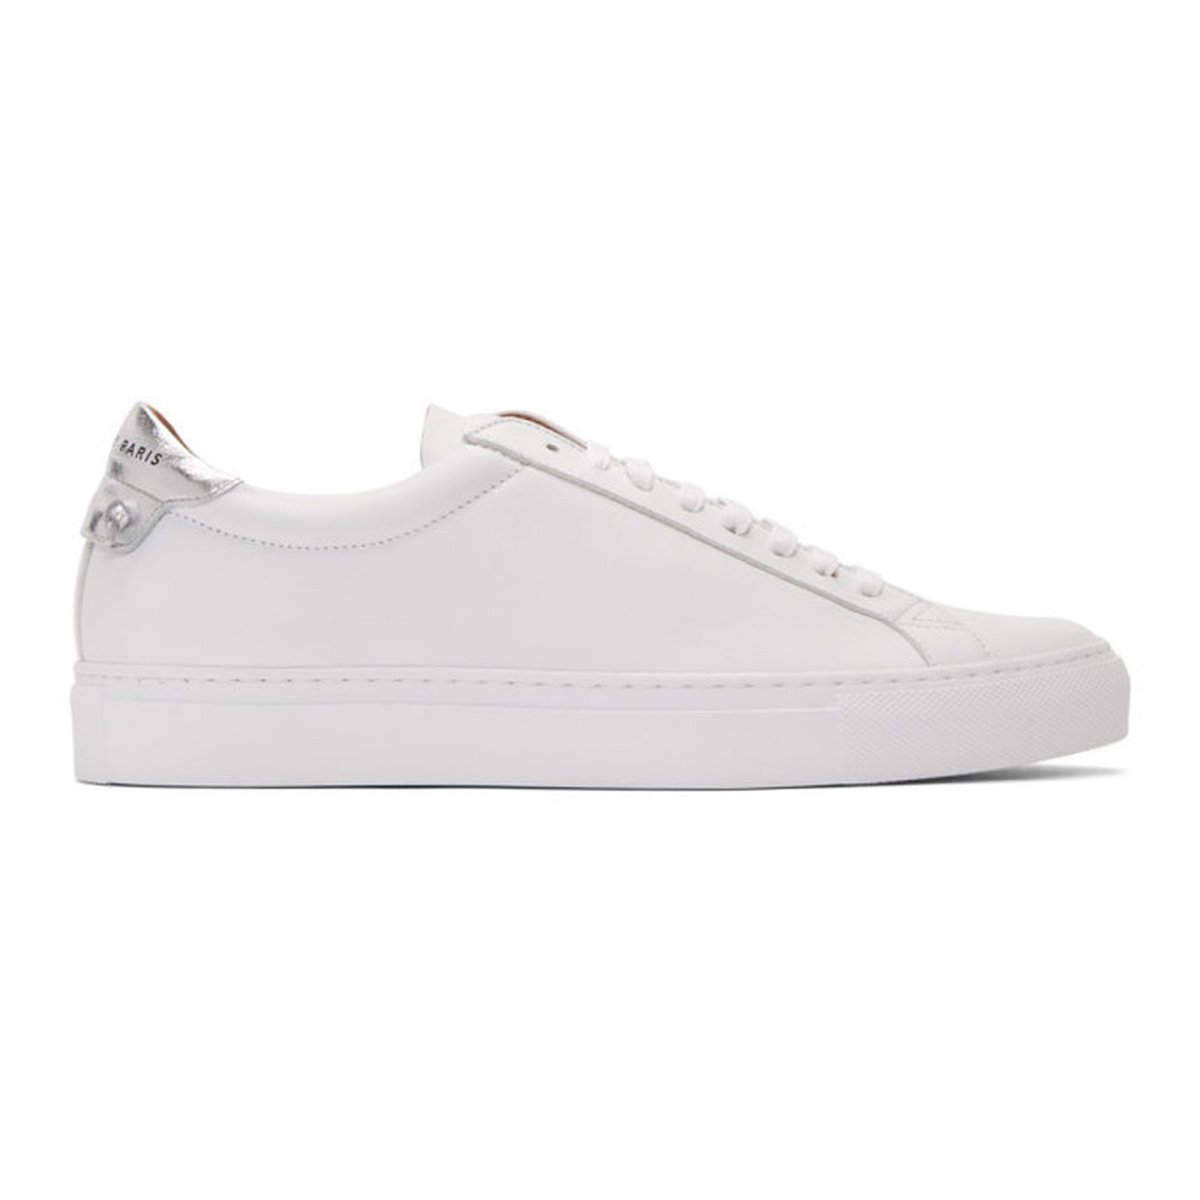 Givenchy White and Silver Urban Street Sneakers Givenchy